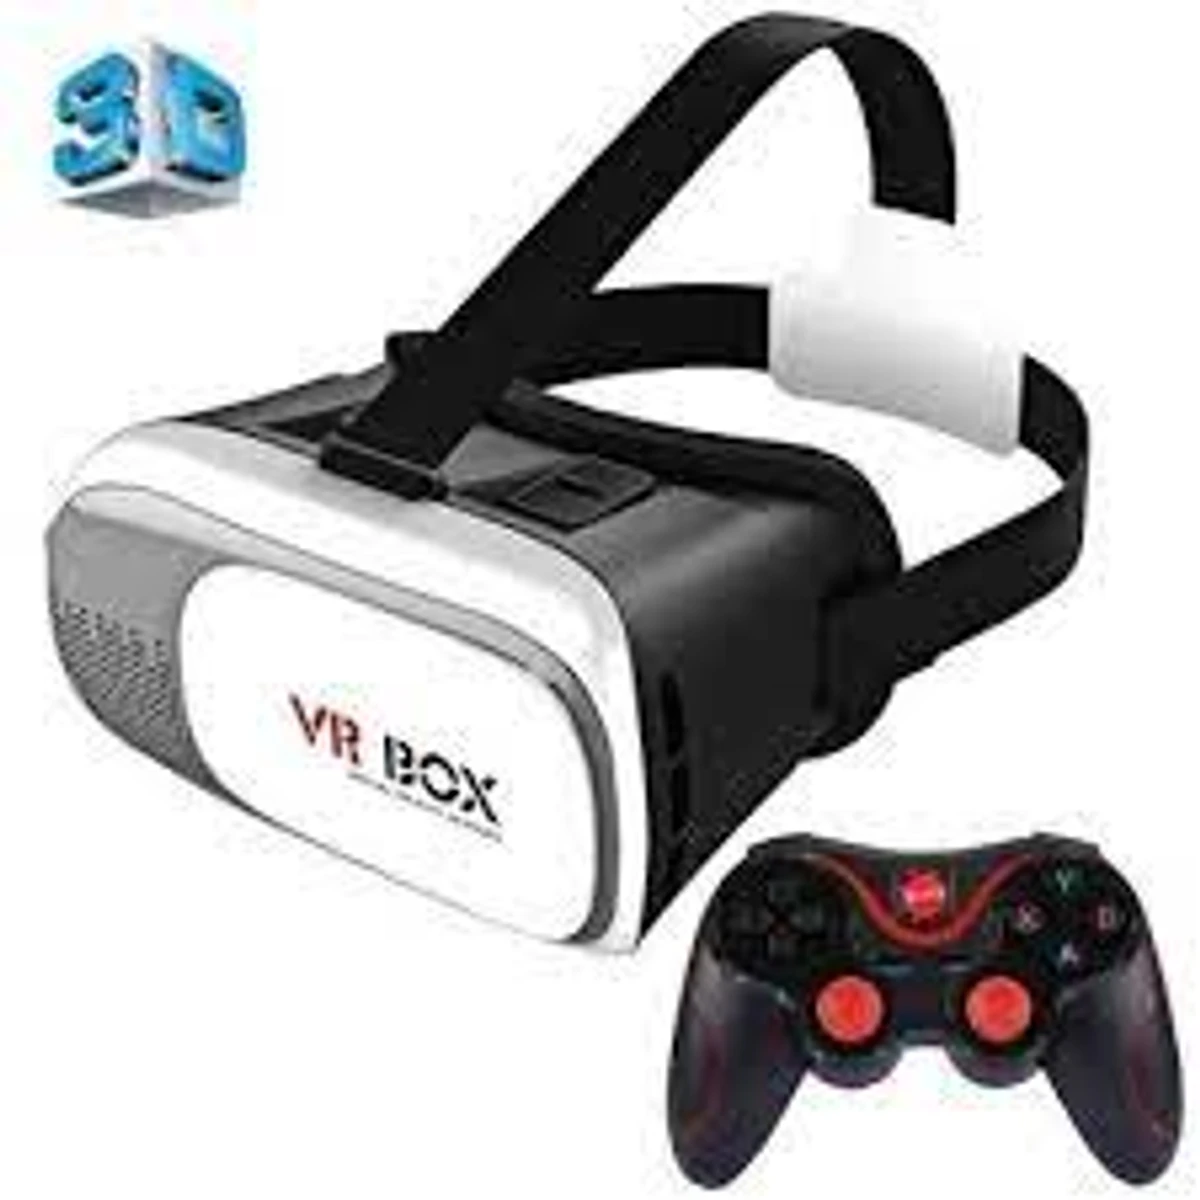 VR BOX 2 Virtual Reality 3D Glasses for Smartphones - White and Black